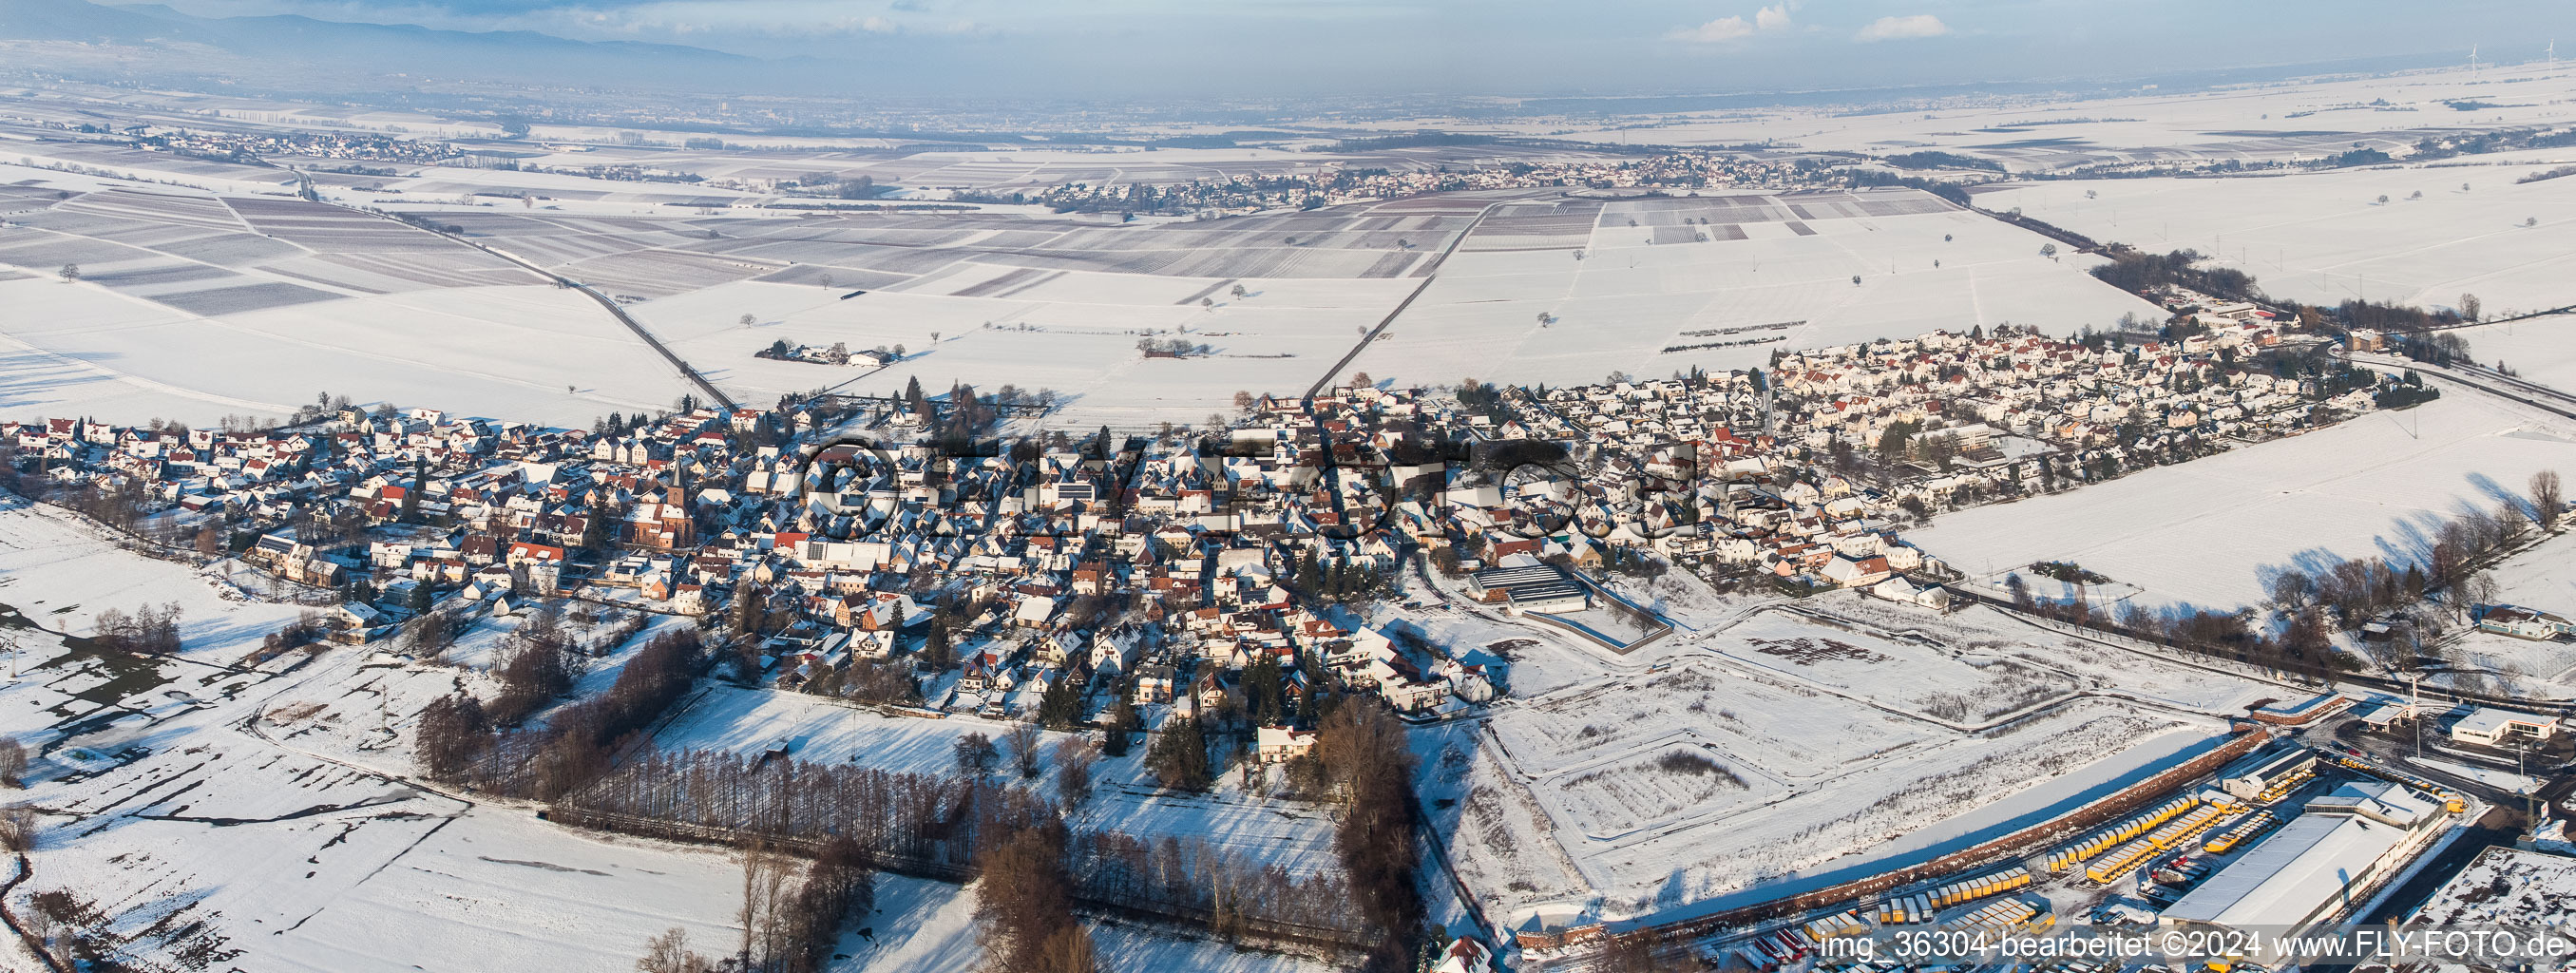 Aerial view of Panorama perspecitve of Wintry snowy Village - view on the edge of agricultural fields and farmland in Rohrbach in the state Rhineland-Palatinate, Germany